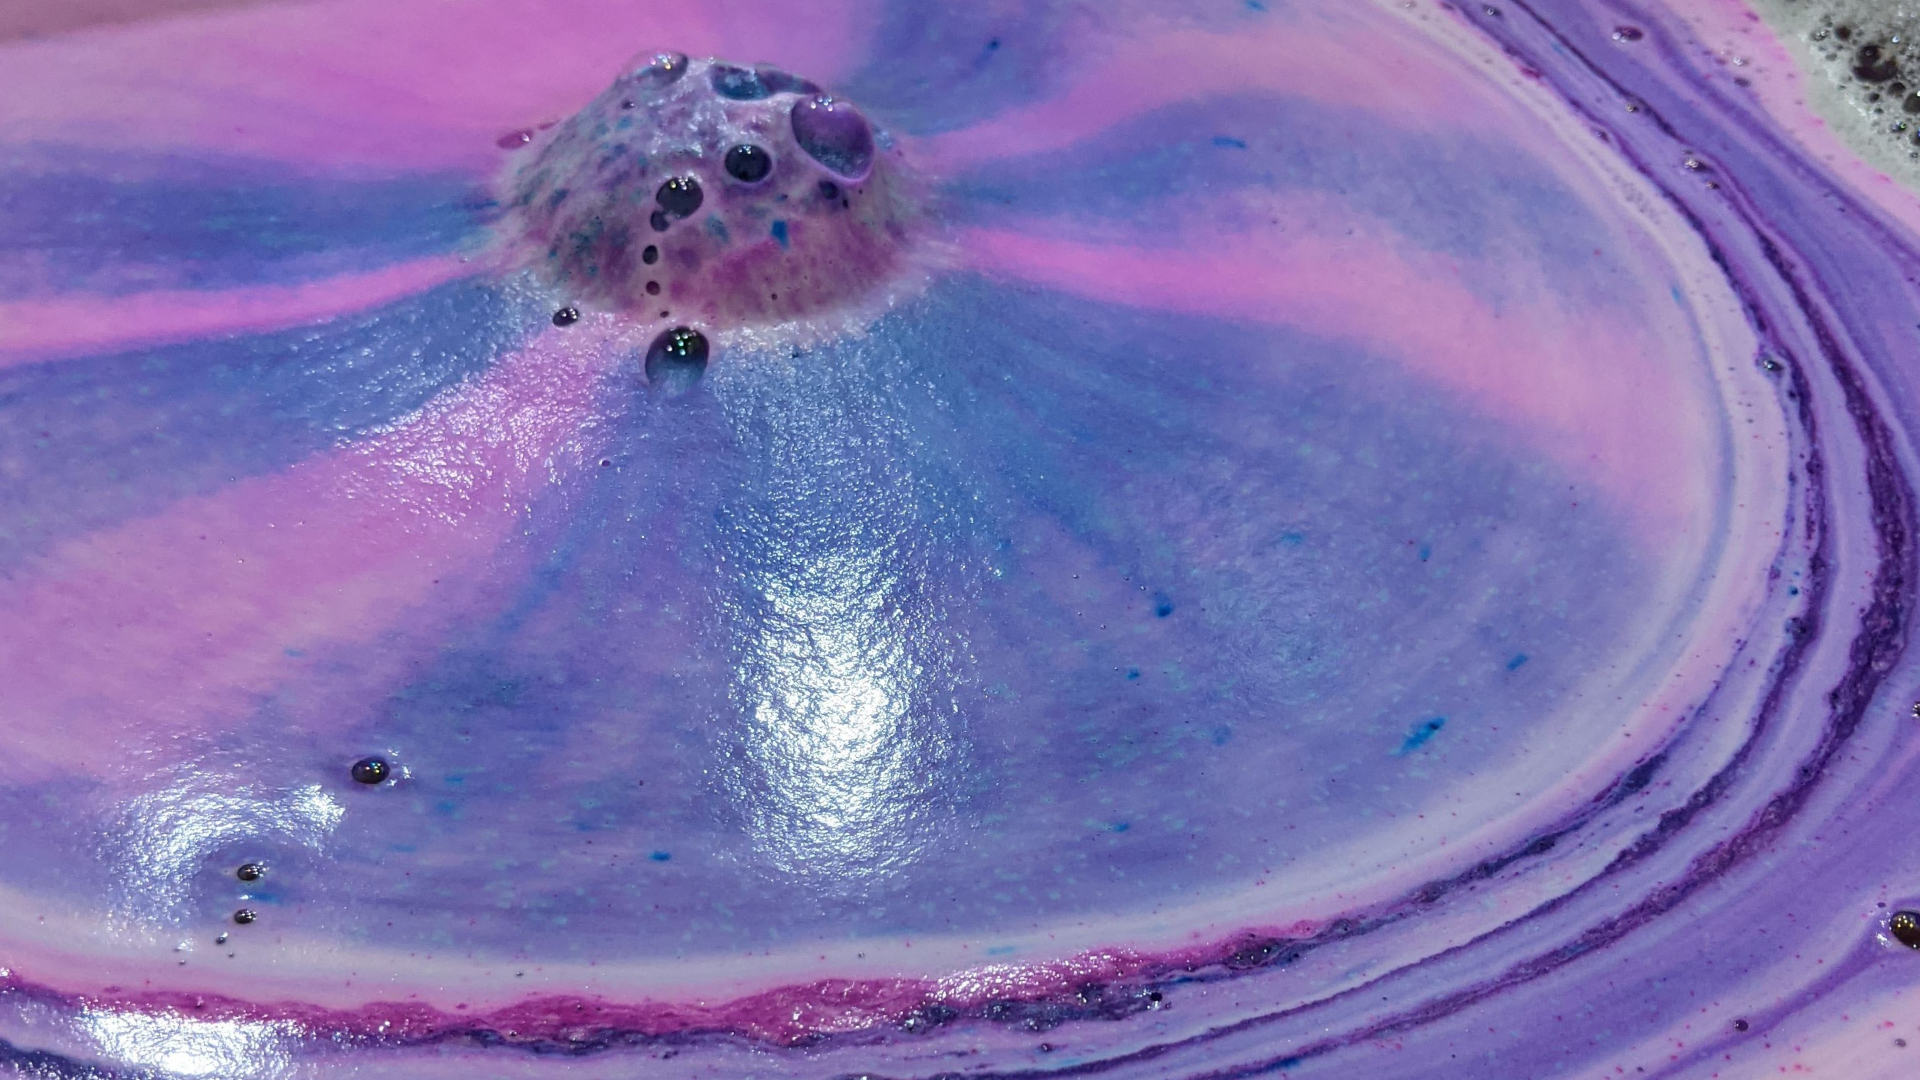 close up photo of a bath bomb in the water transforming the color into violet, lilac and soft blue pastel hues. 